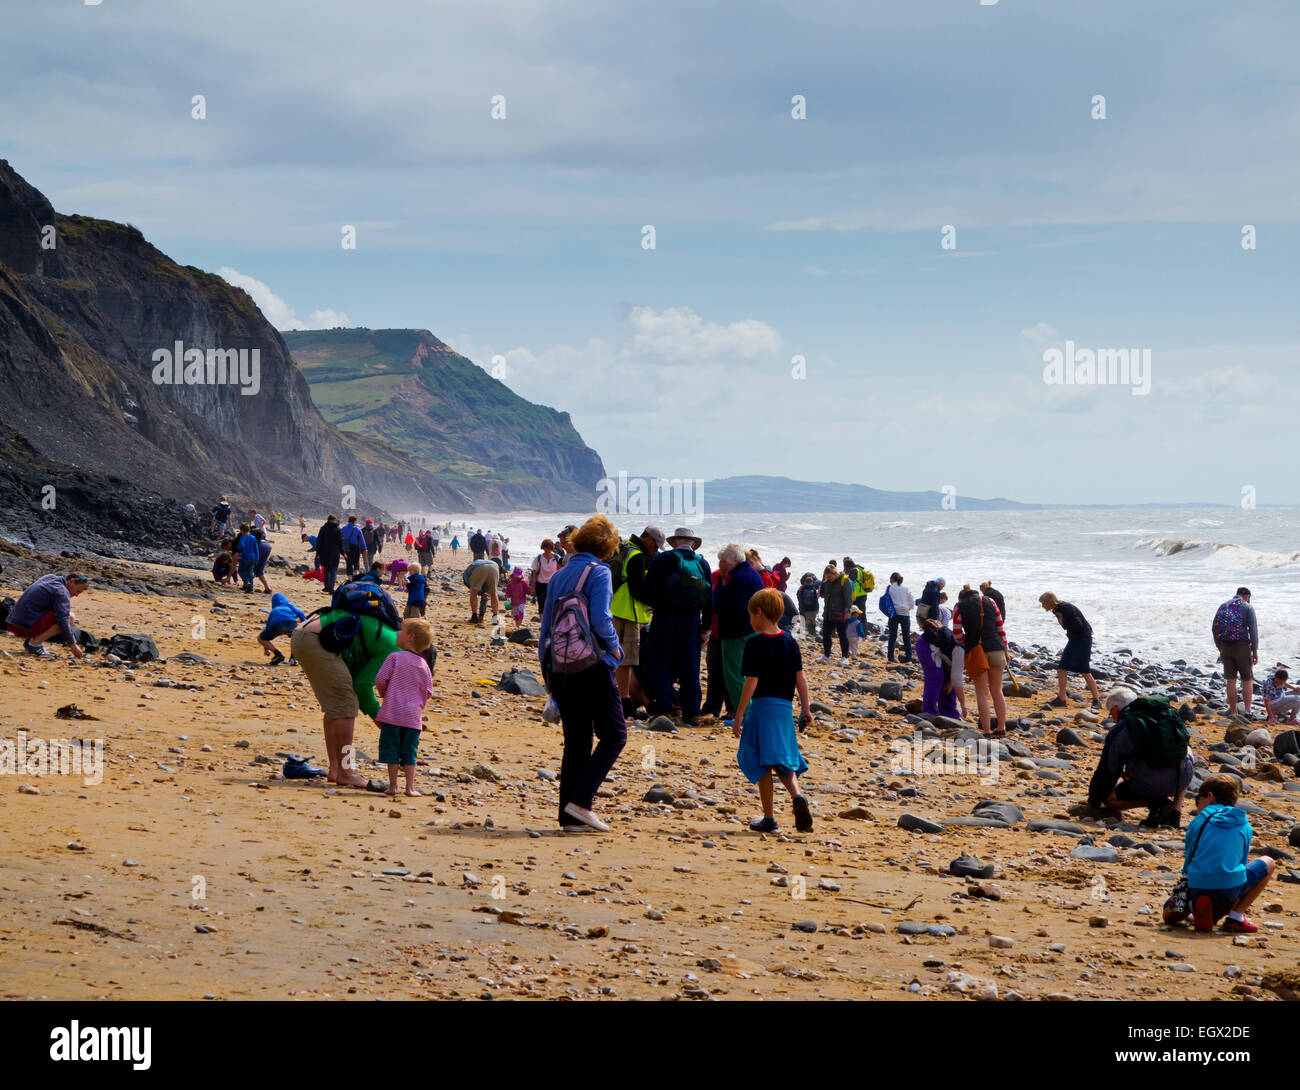 People hunting for fossils on the beach below the crumbling cliffs at Charmouth on the Jurassic Coast in West Dorset England UK Stock Photo